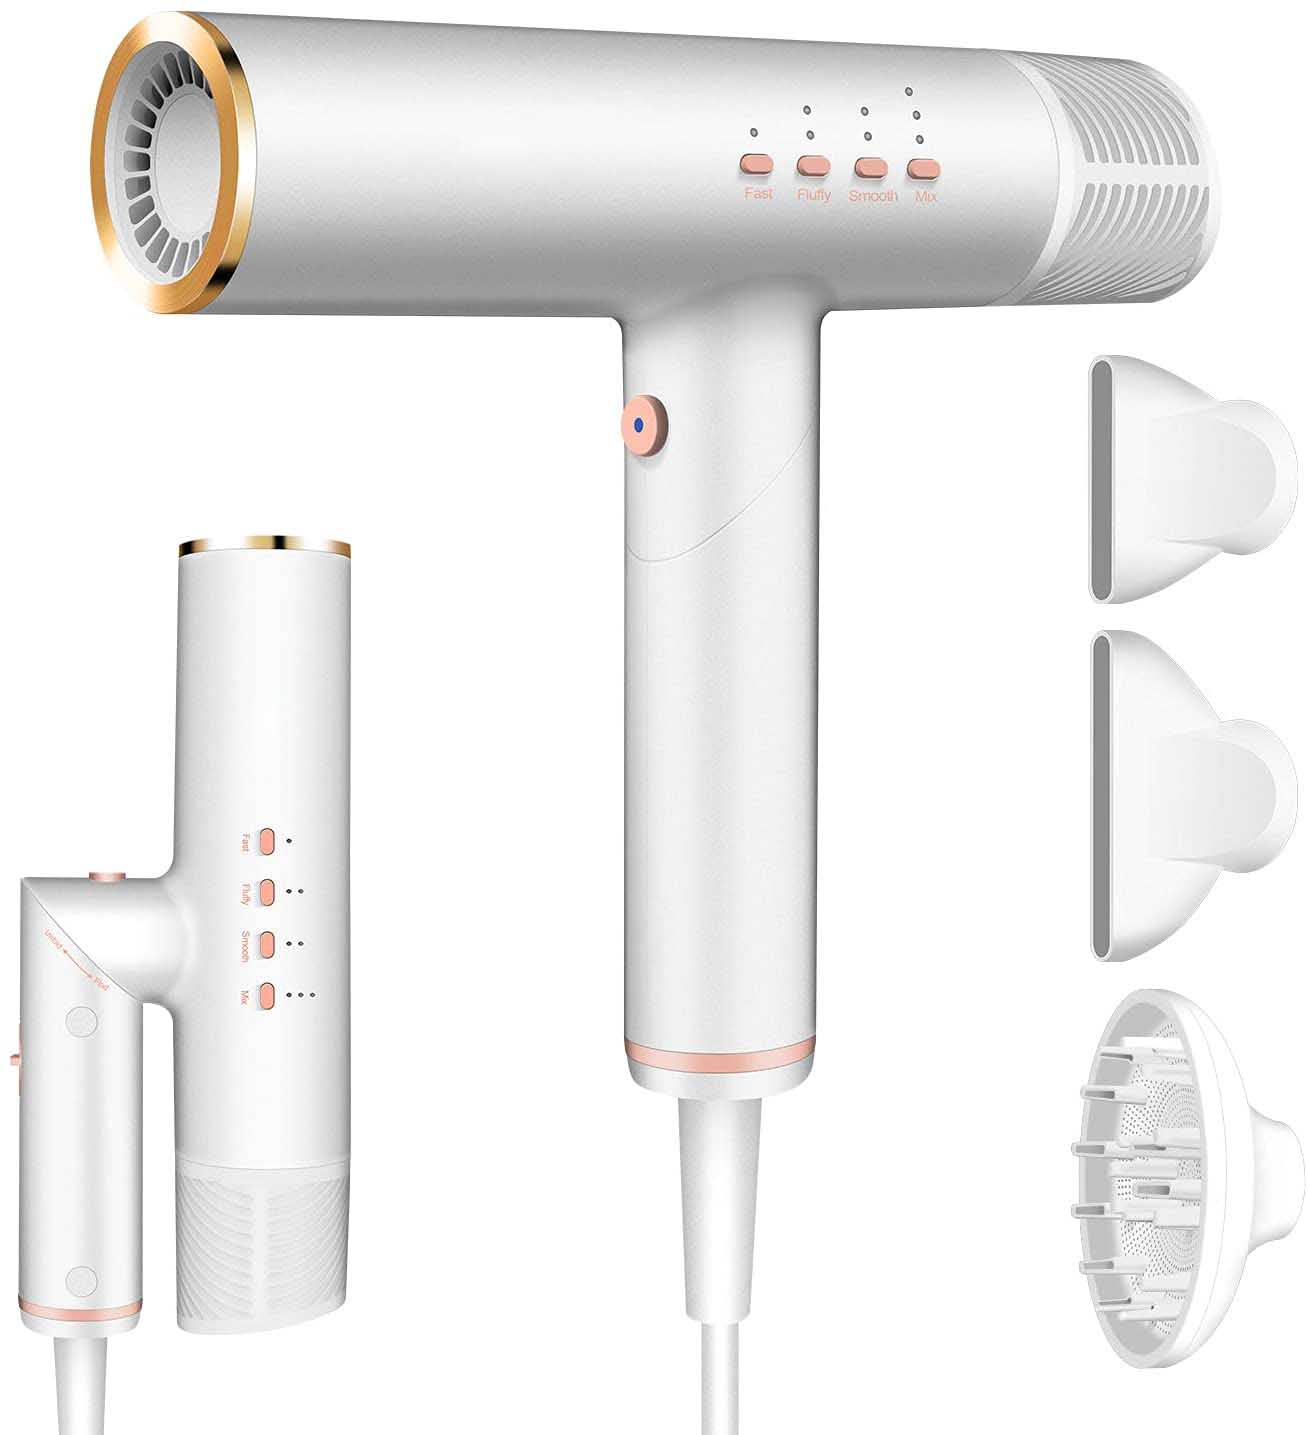 The latest best-selling high-power technical style hair dryer – DY